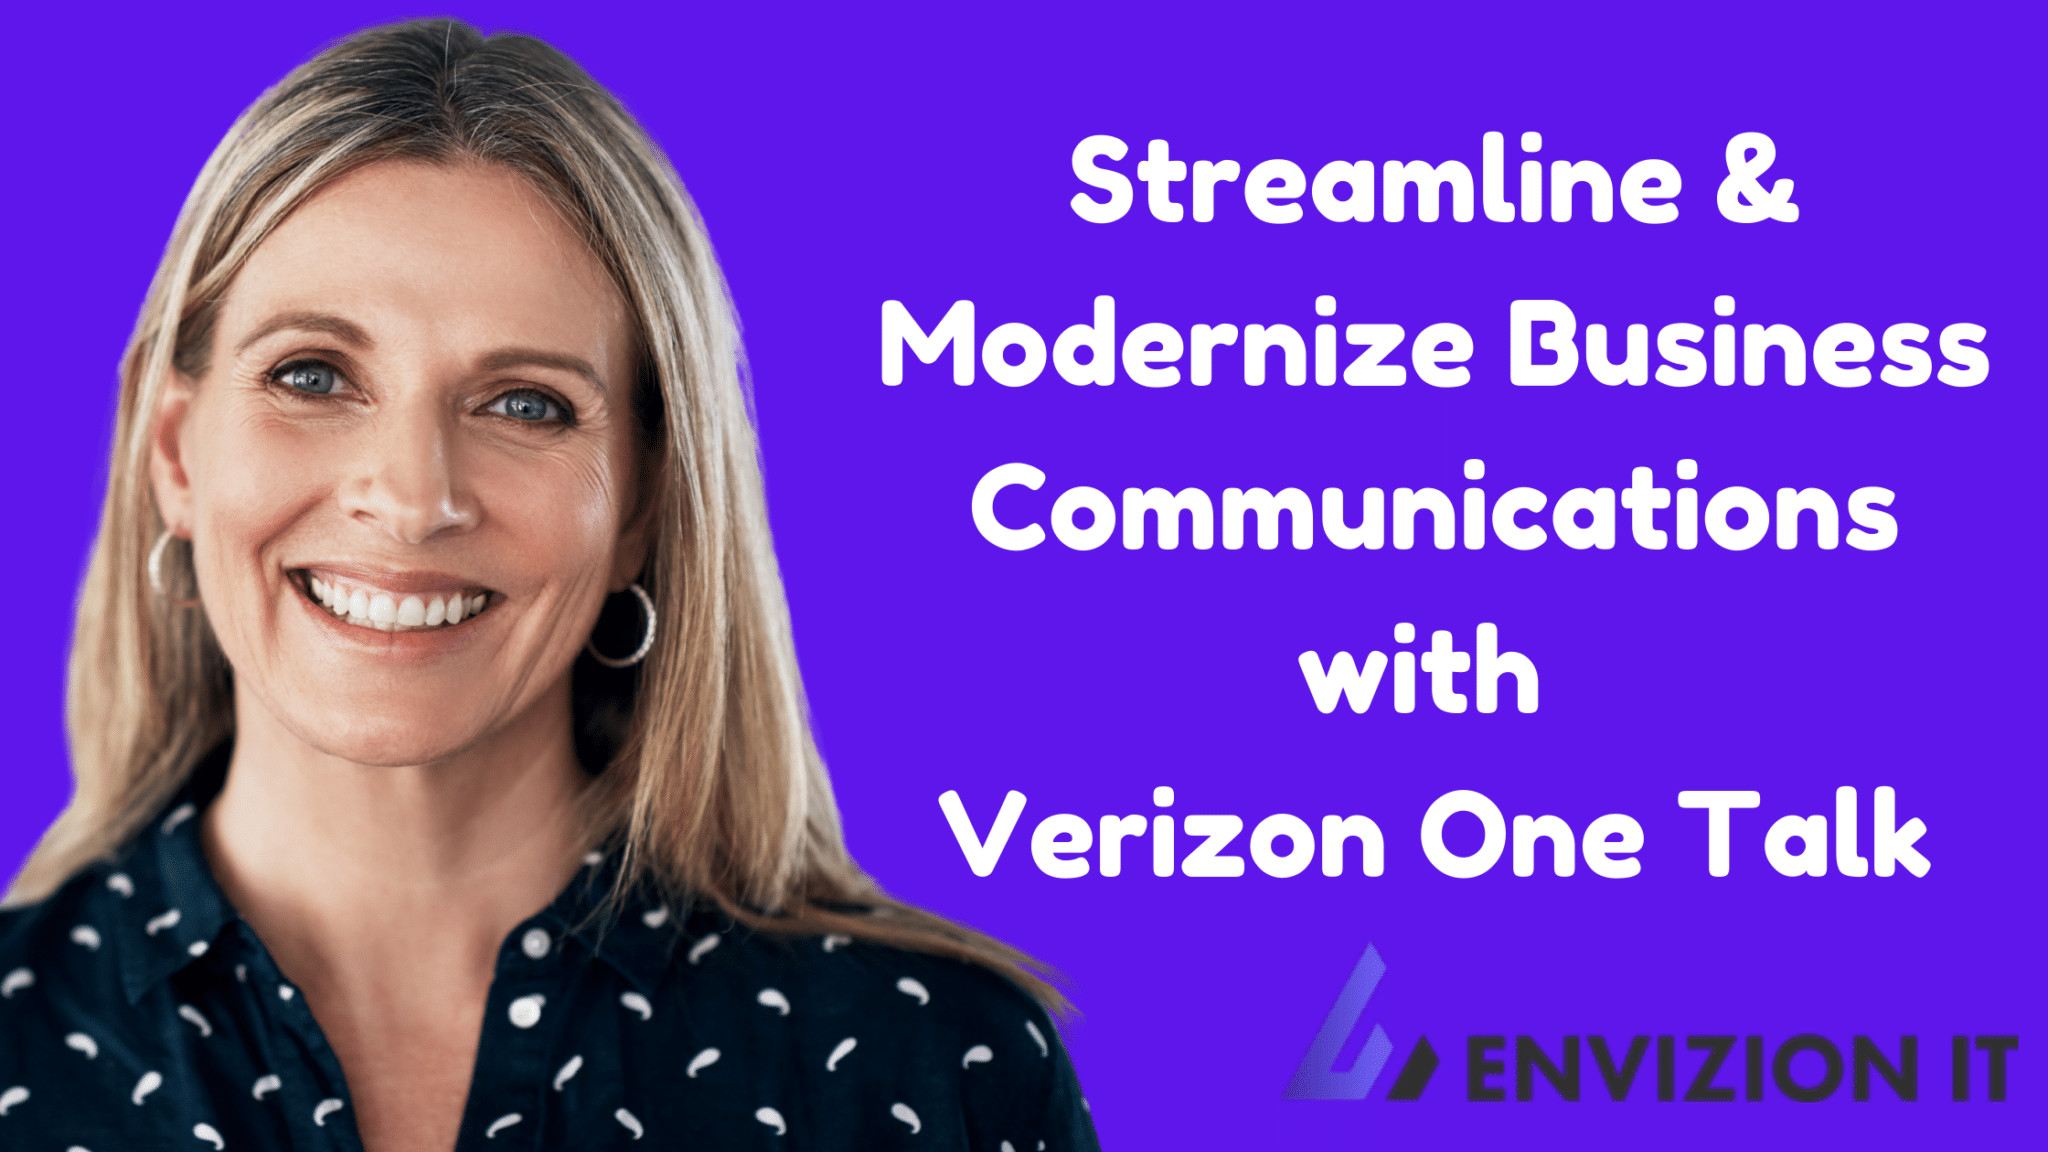 Tired of Traditional Phone Systems? Verizon One Talk is Your One-Stop Solution